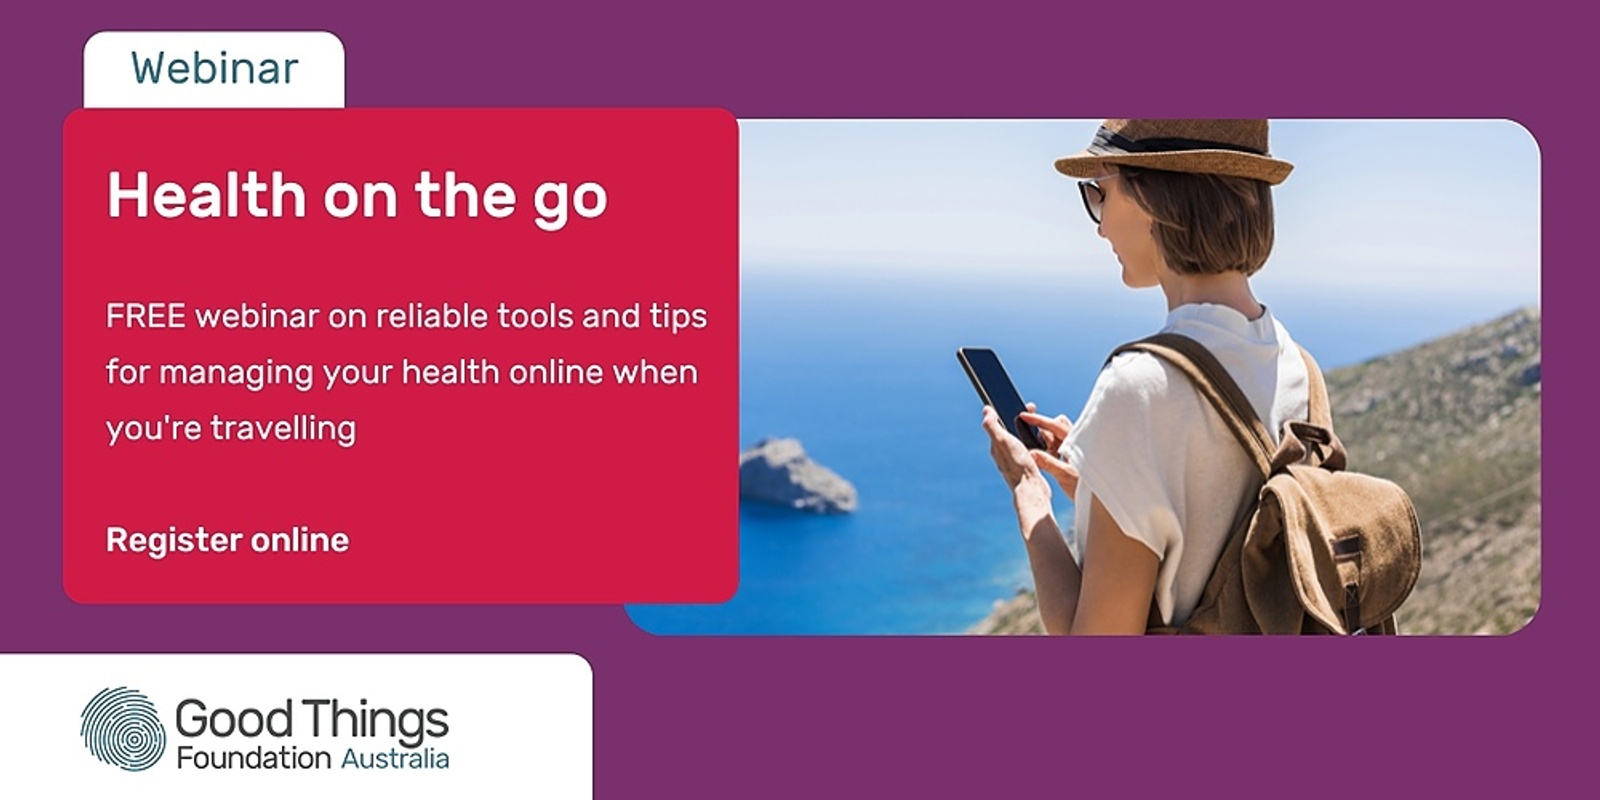 Health on the go: Digital health tips for travellers